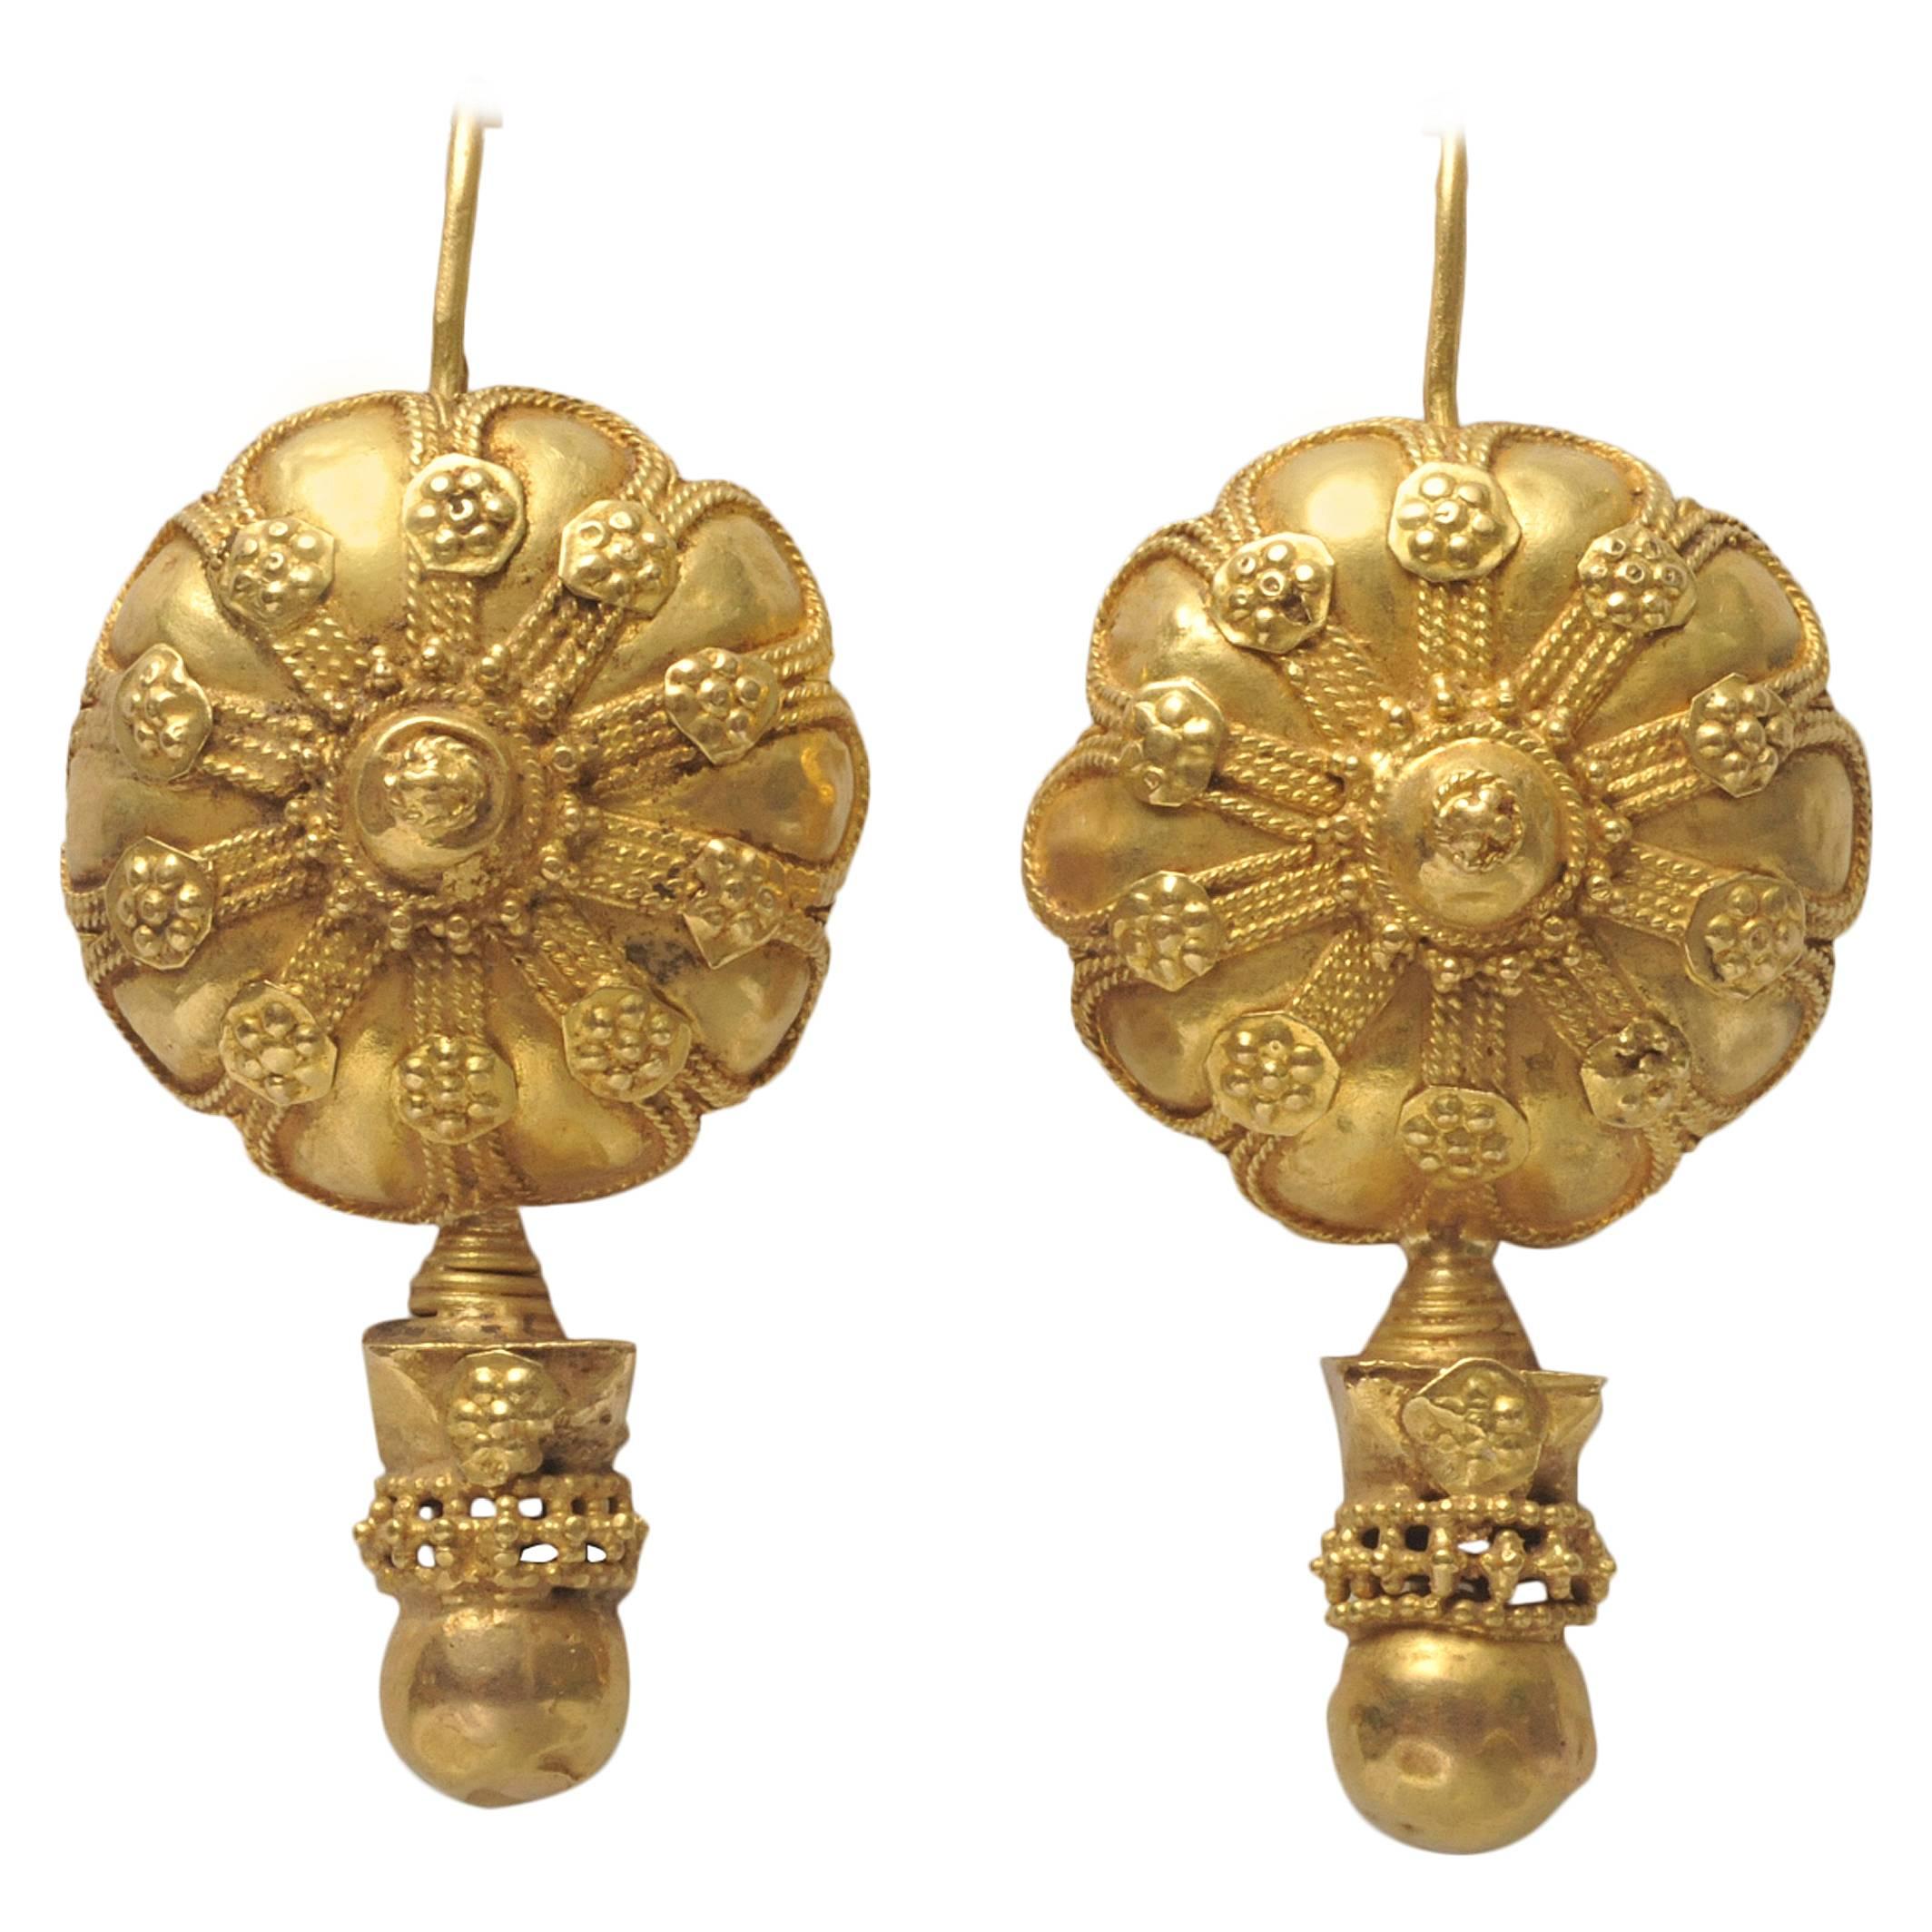 Rare Early 1900's Indian 22K Gold Earrings with Fine Granulation Work